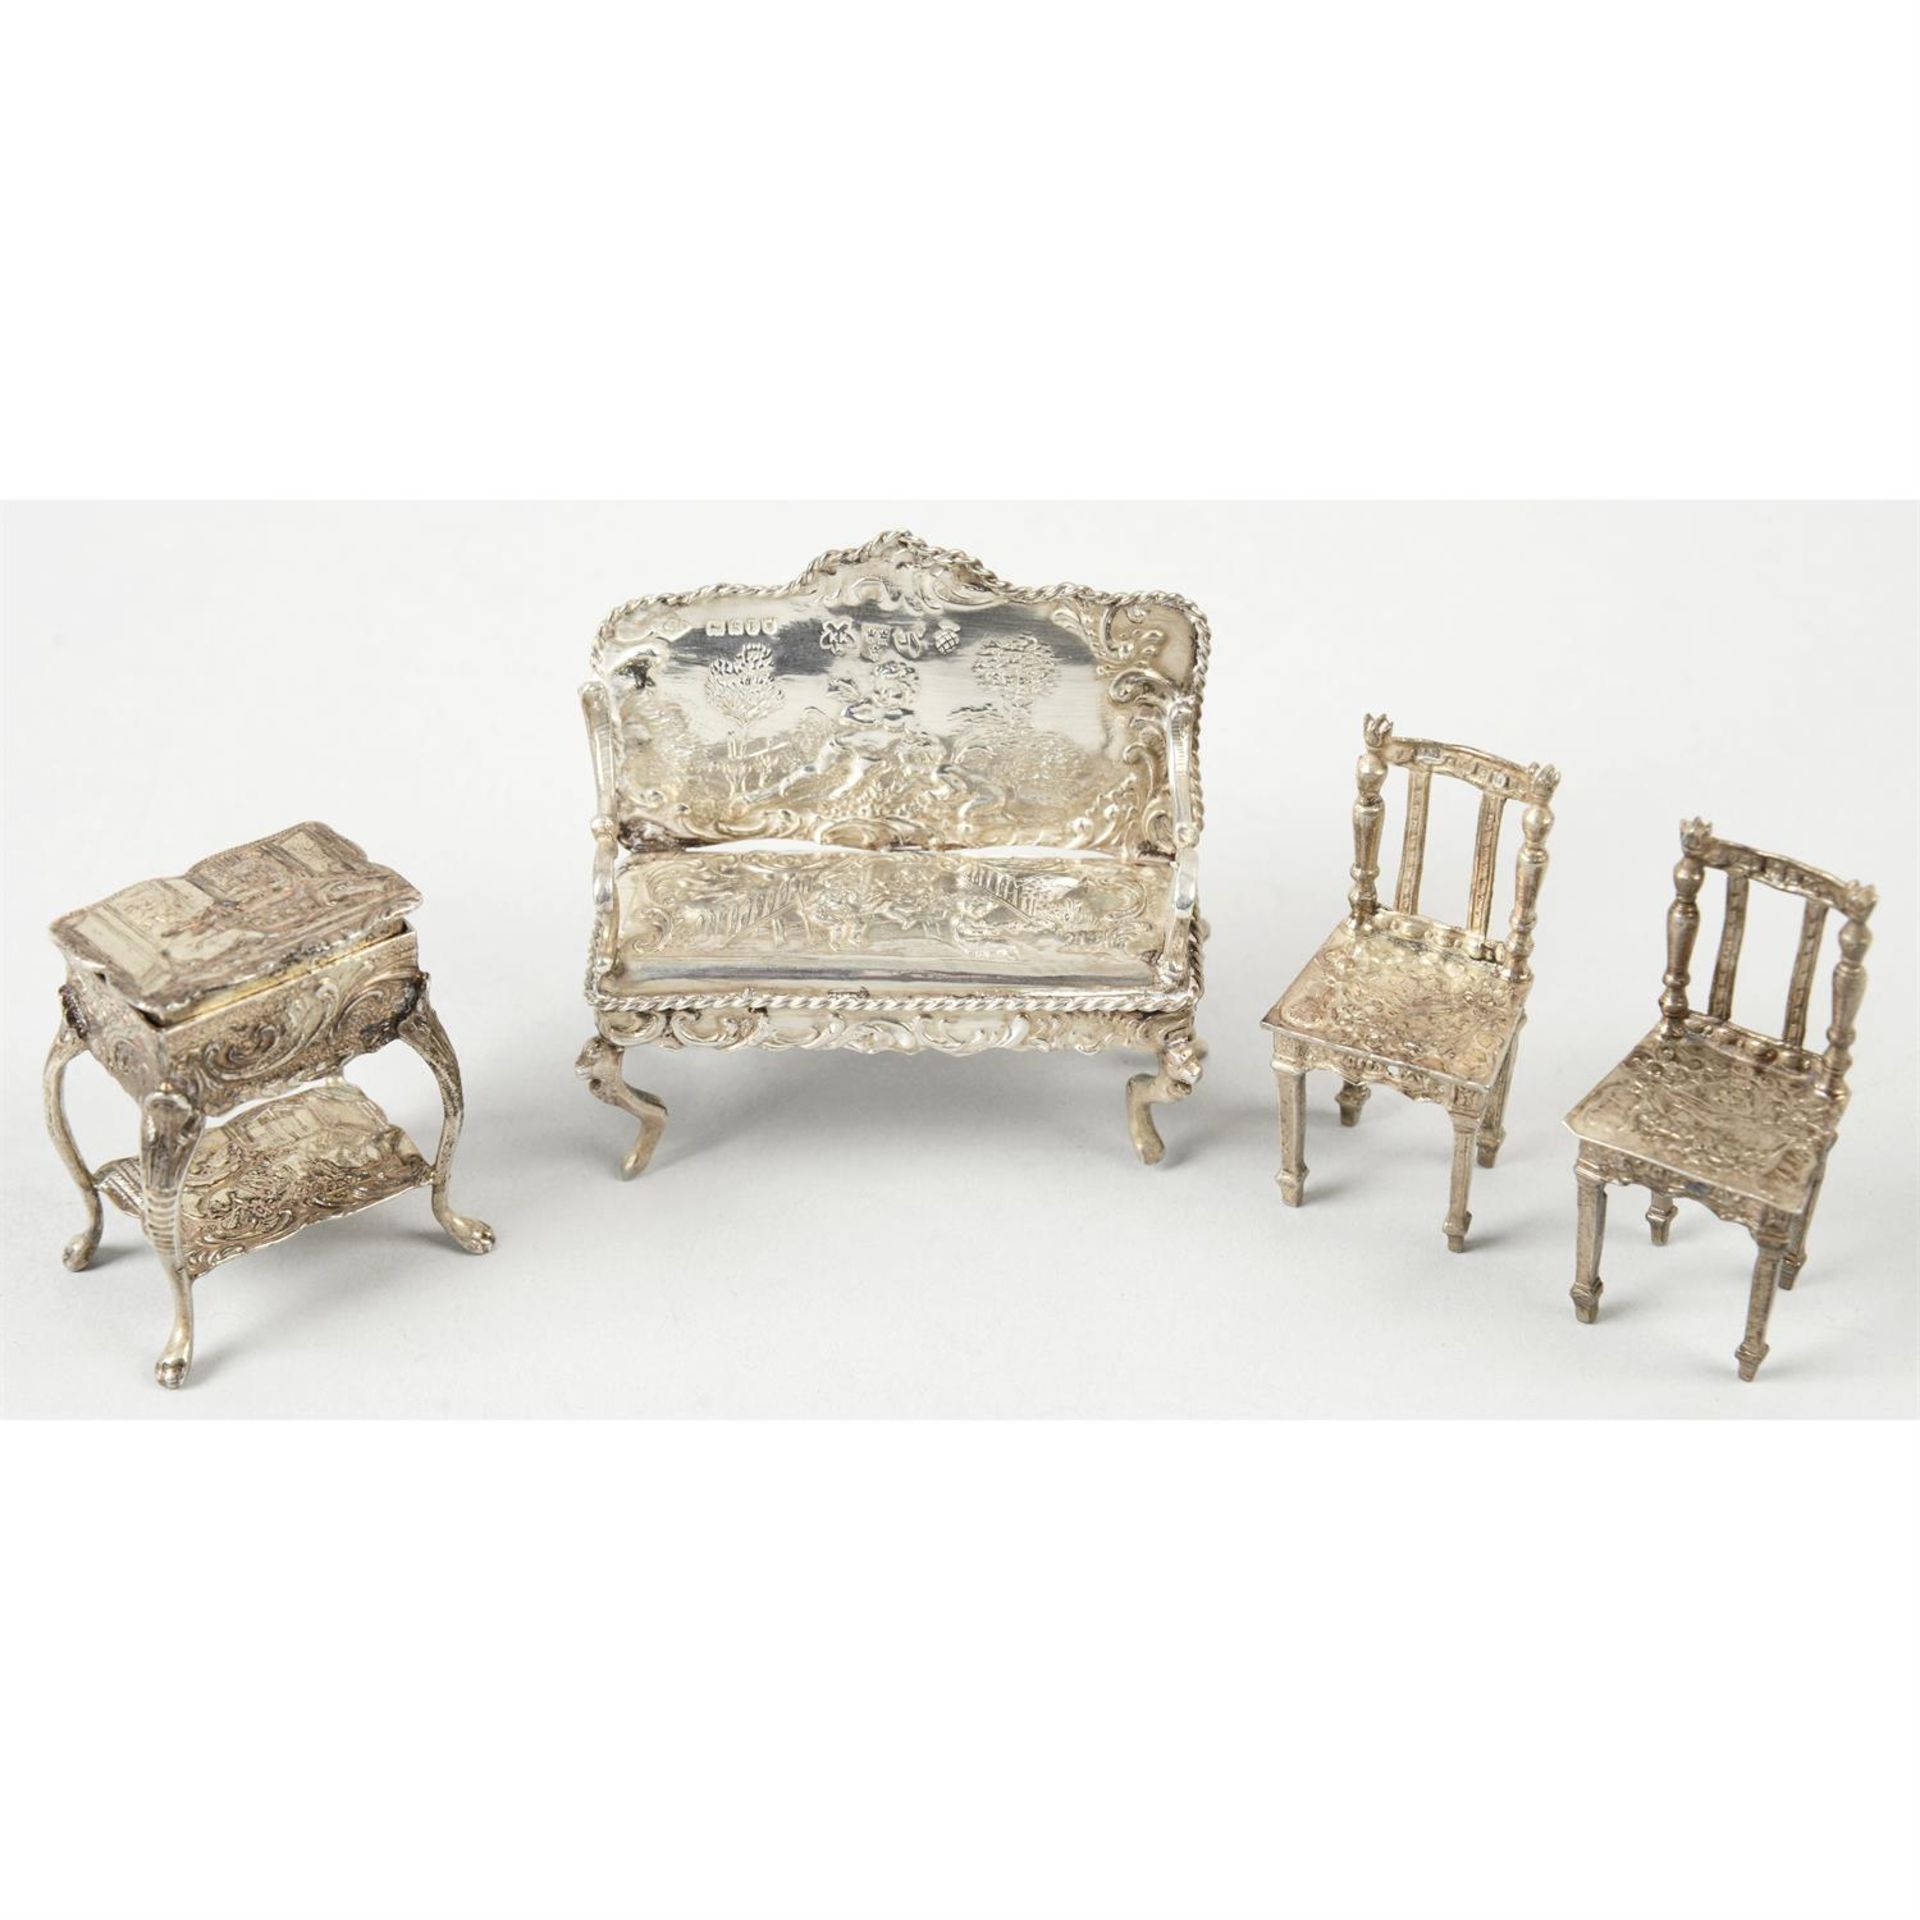 A collection of silver miniature or toy furniture to include a settee, two chairs & a cabinet table,